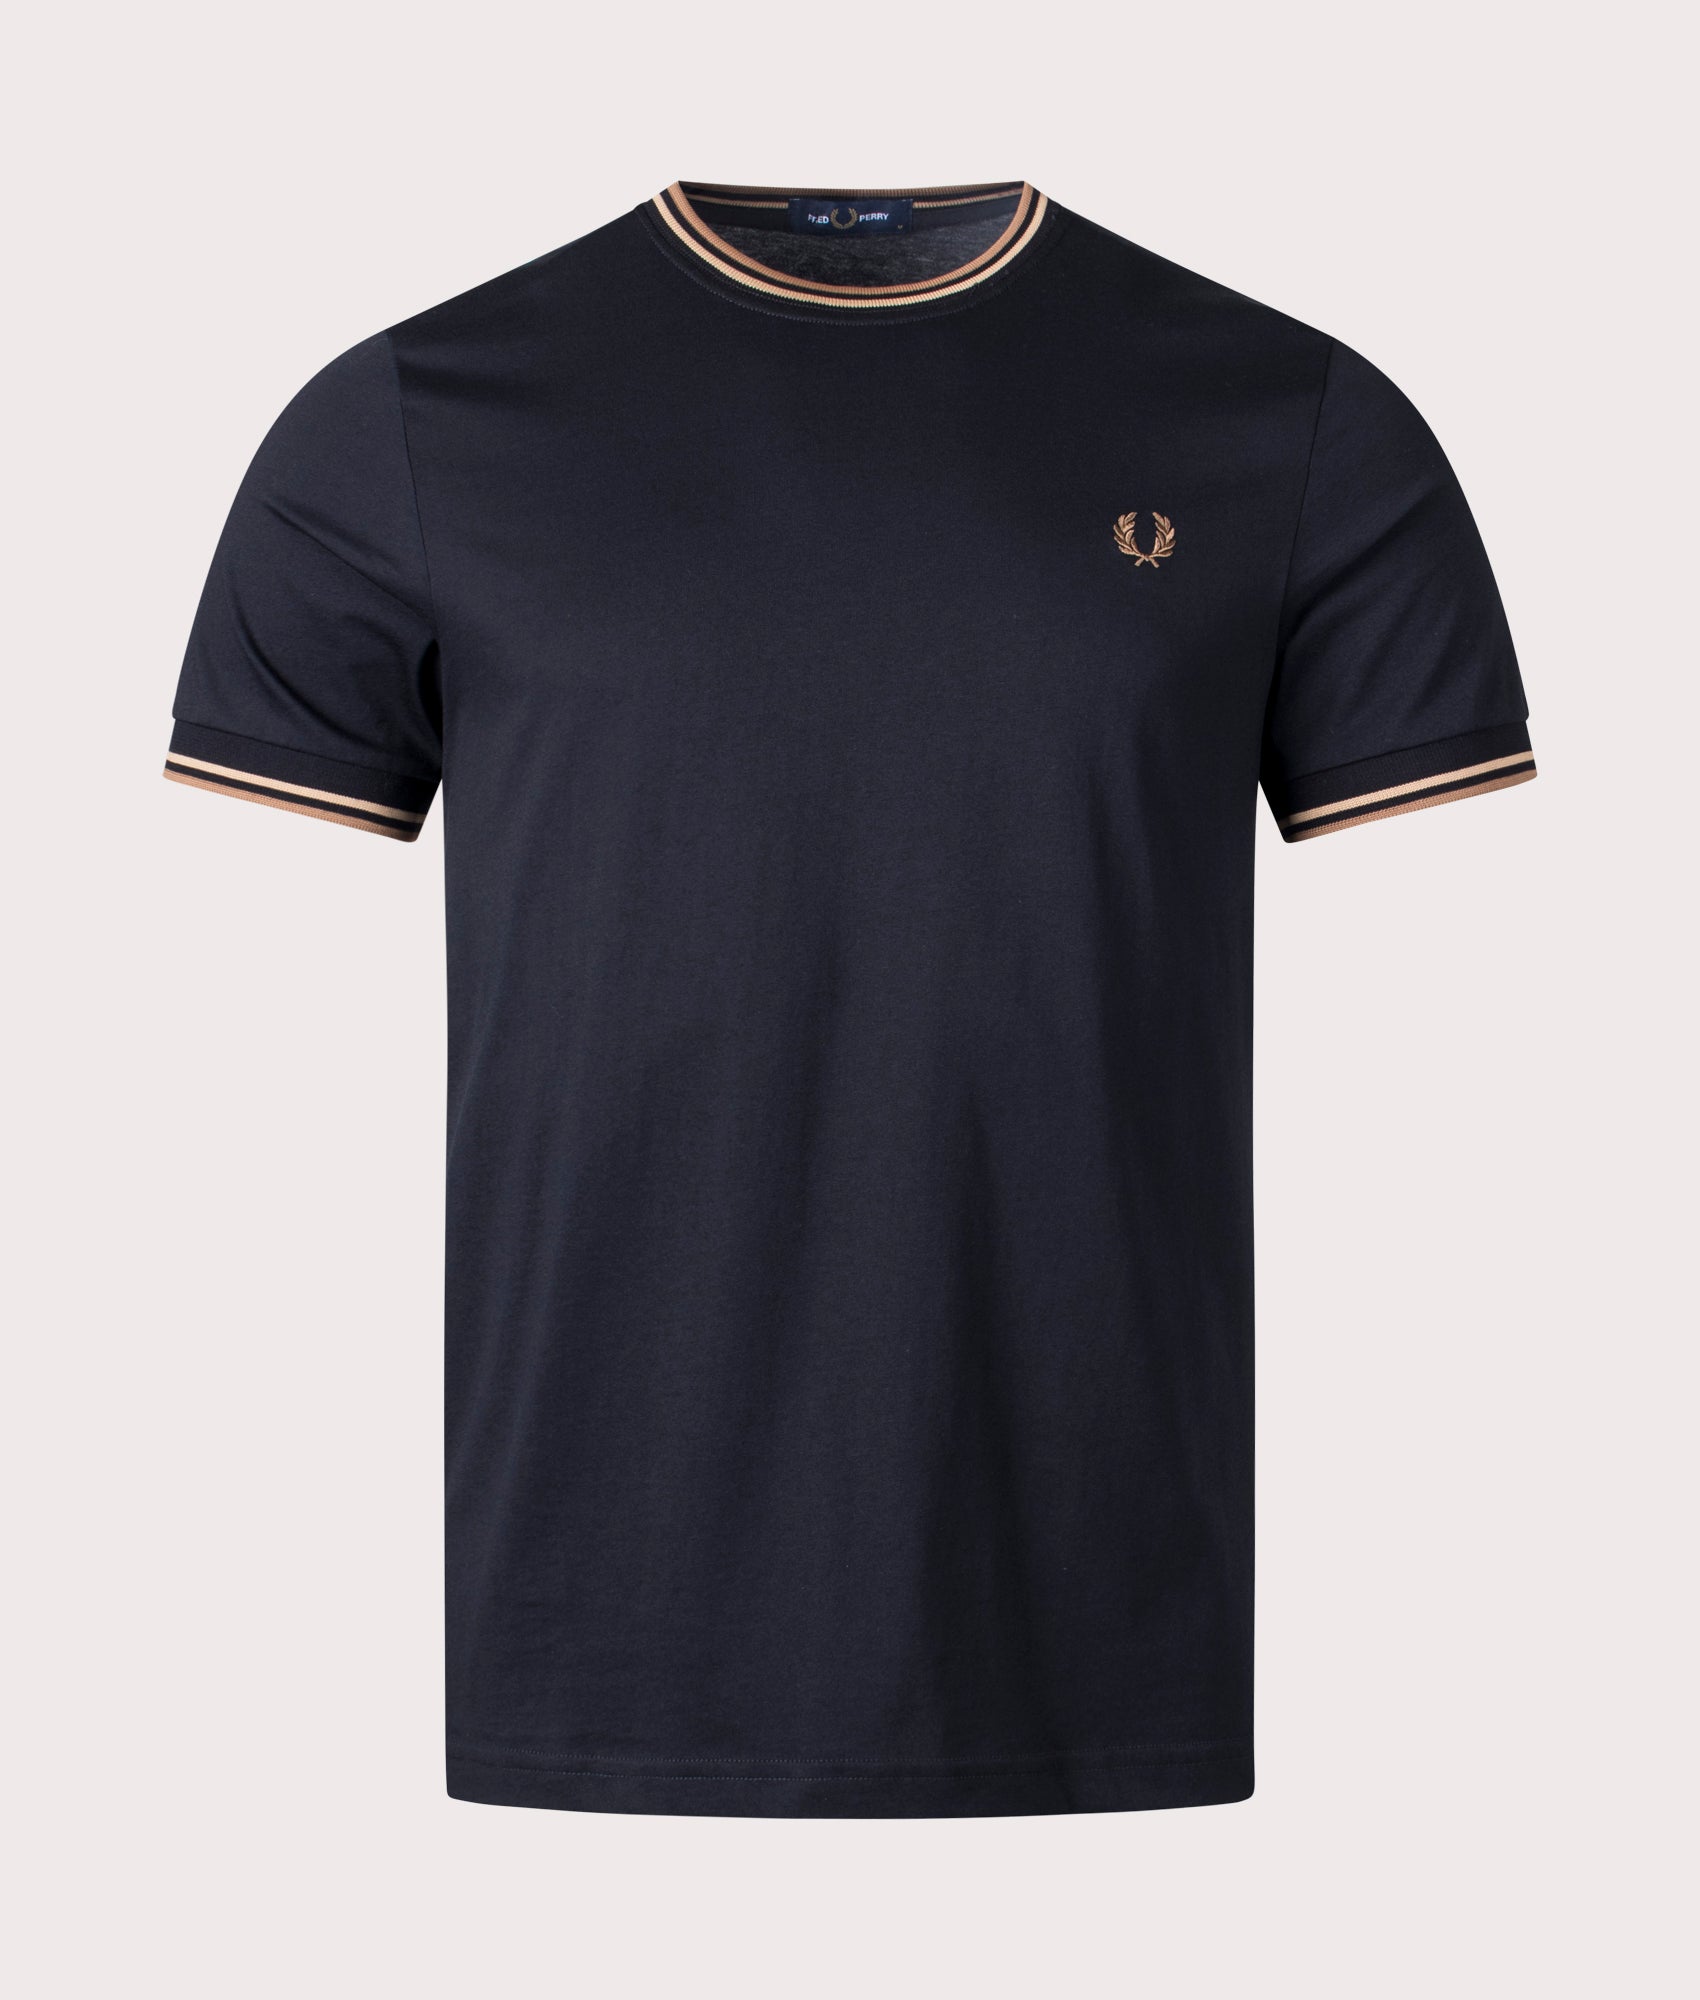 Fred Perry Mens Twin Tipped T-Shirt - Colour: U97 Black/Warm Stone/Shaded Stone - Size: Large